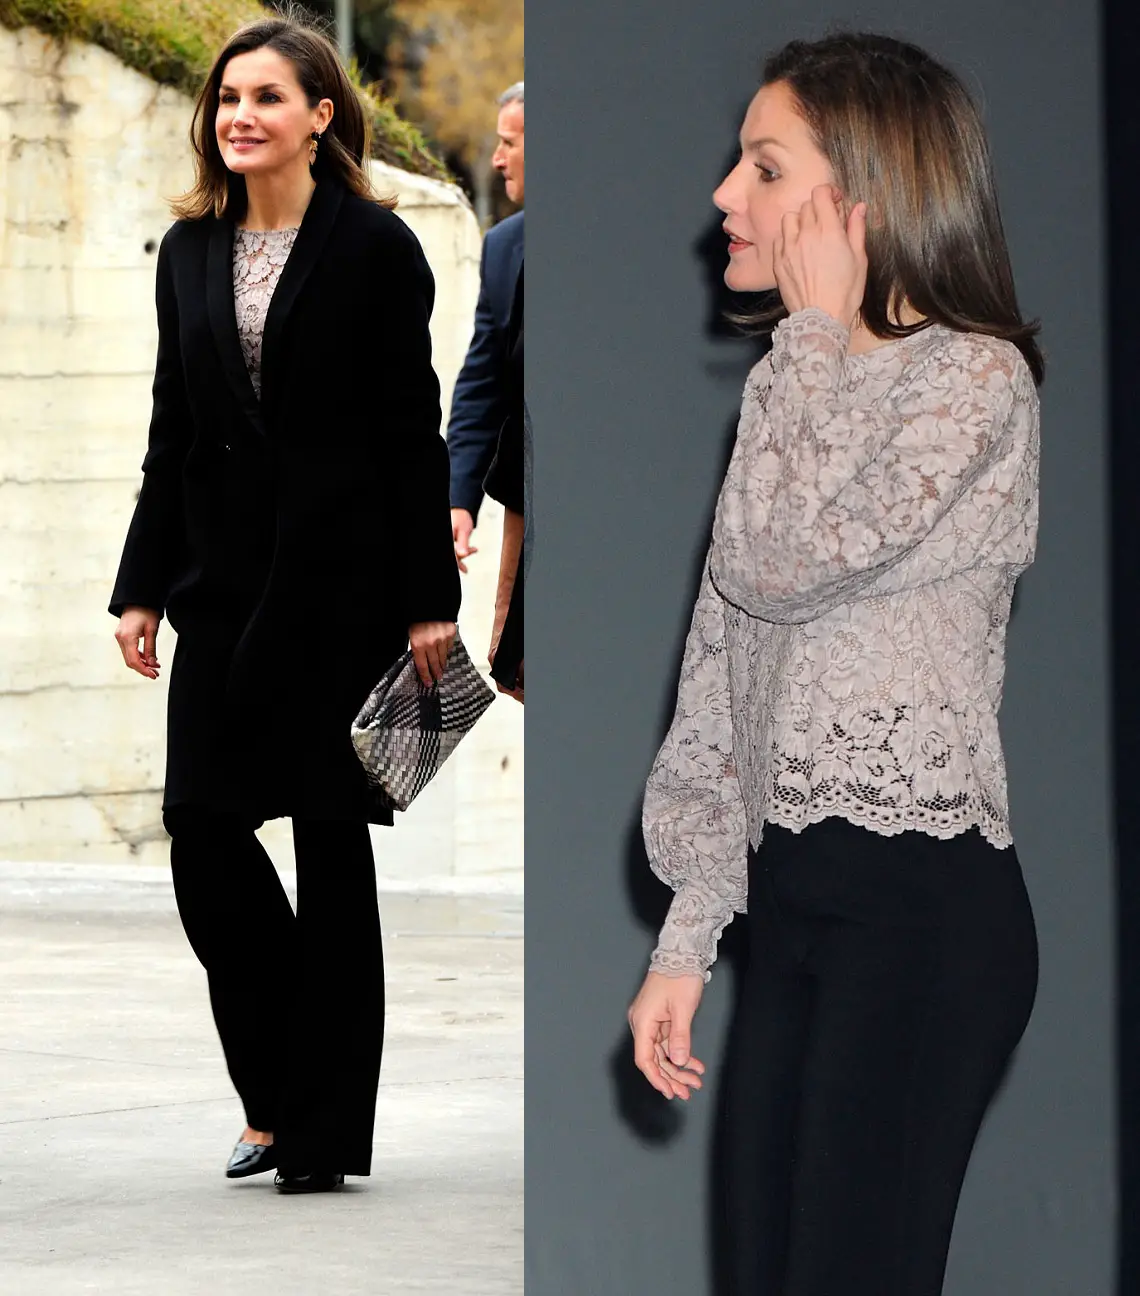 Queen Letizia chose an ensemble reflecting chic yet stylishly formal persona